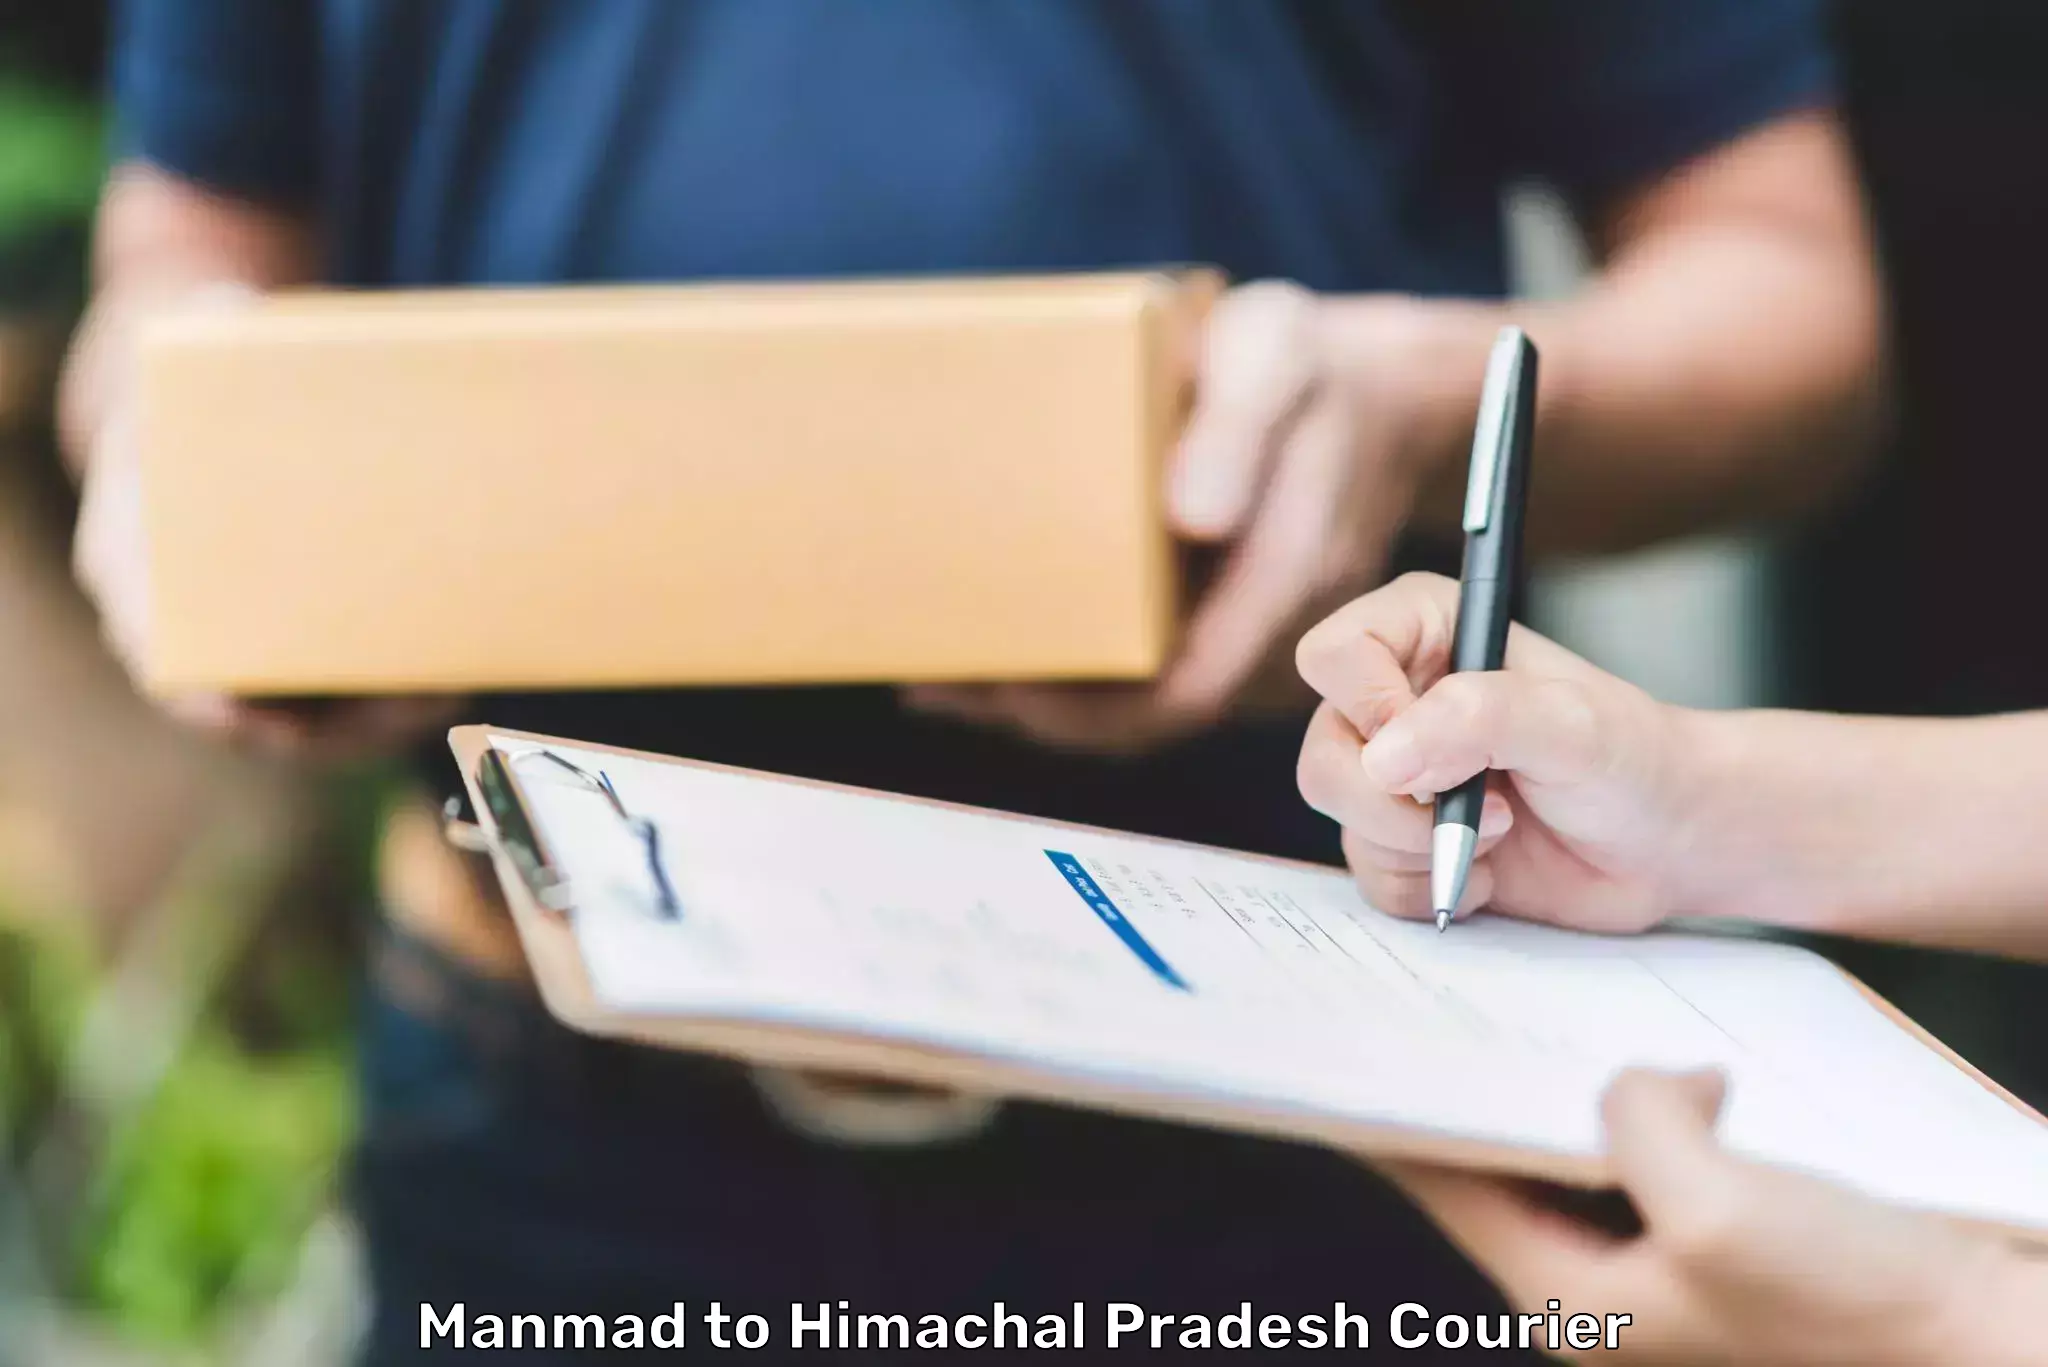 Enhanced shipping experience in Manmad to Himachal Pradesh